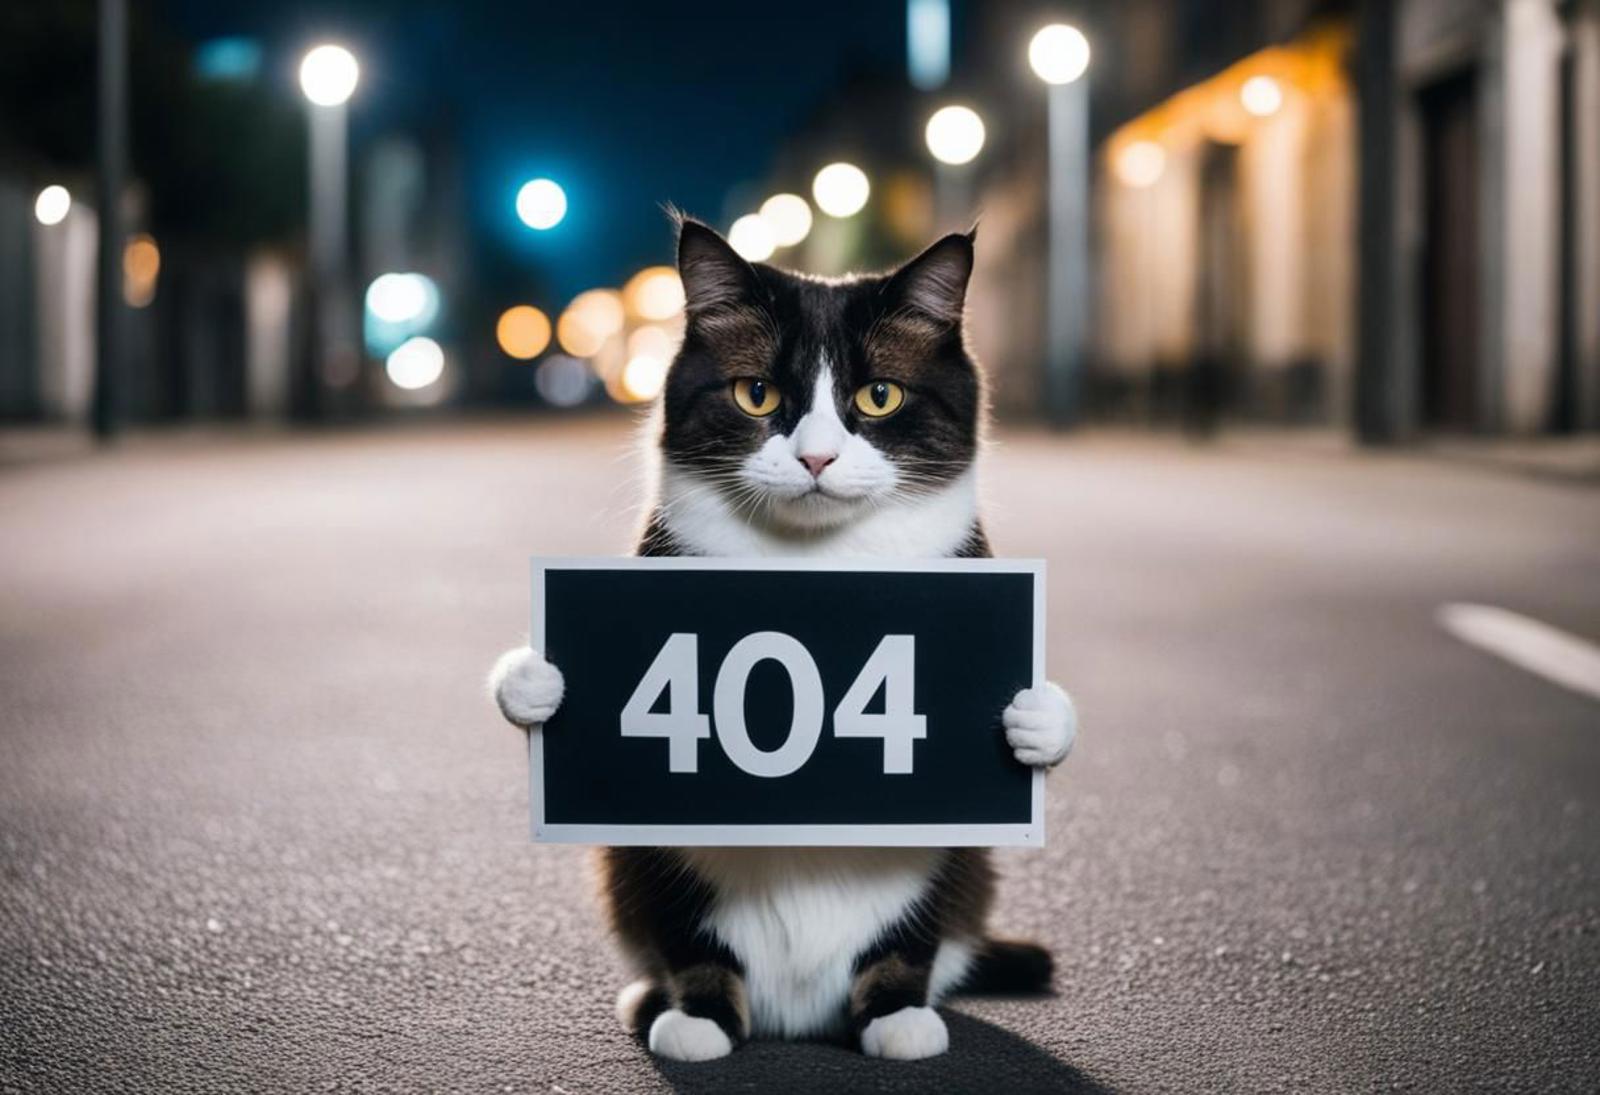 A cat holding a 404 sign.